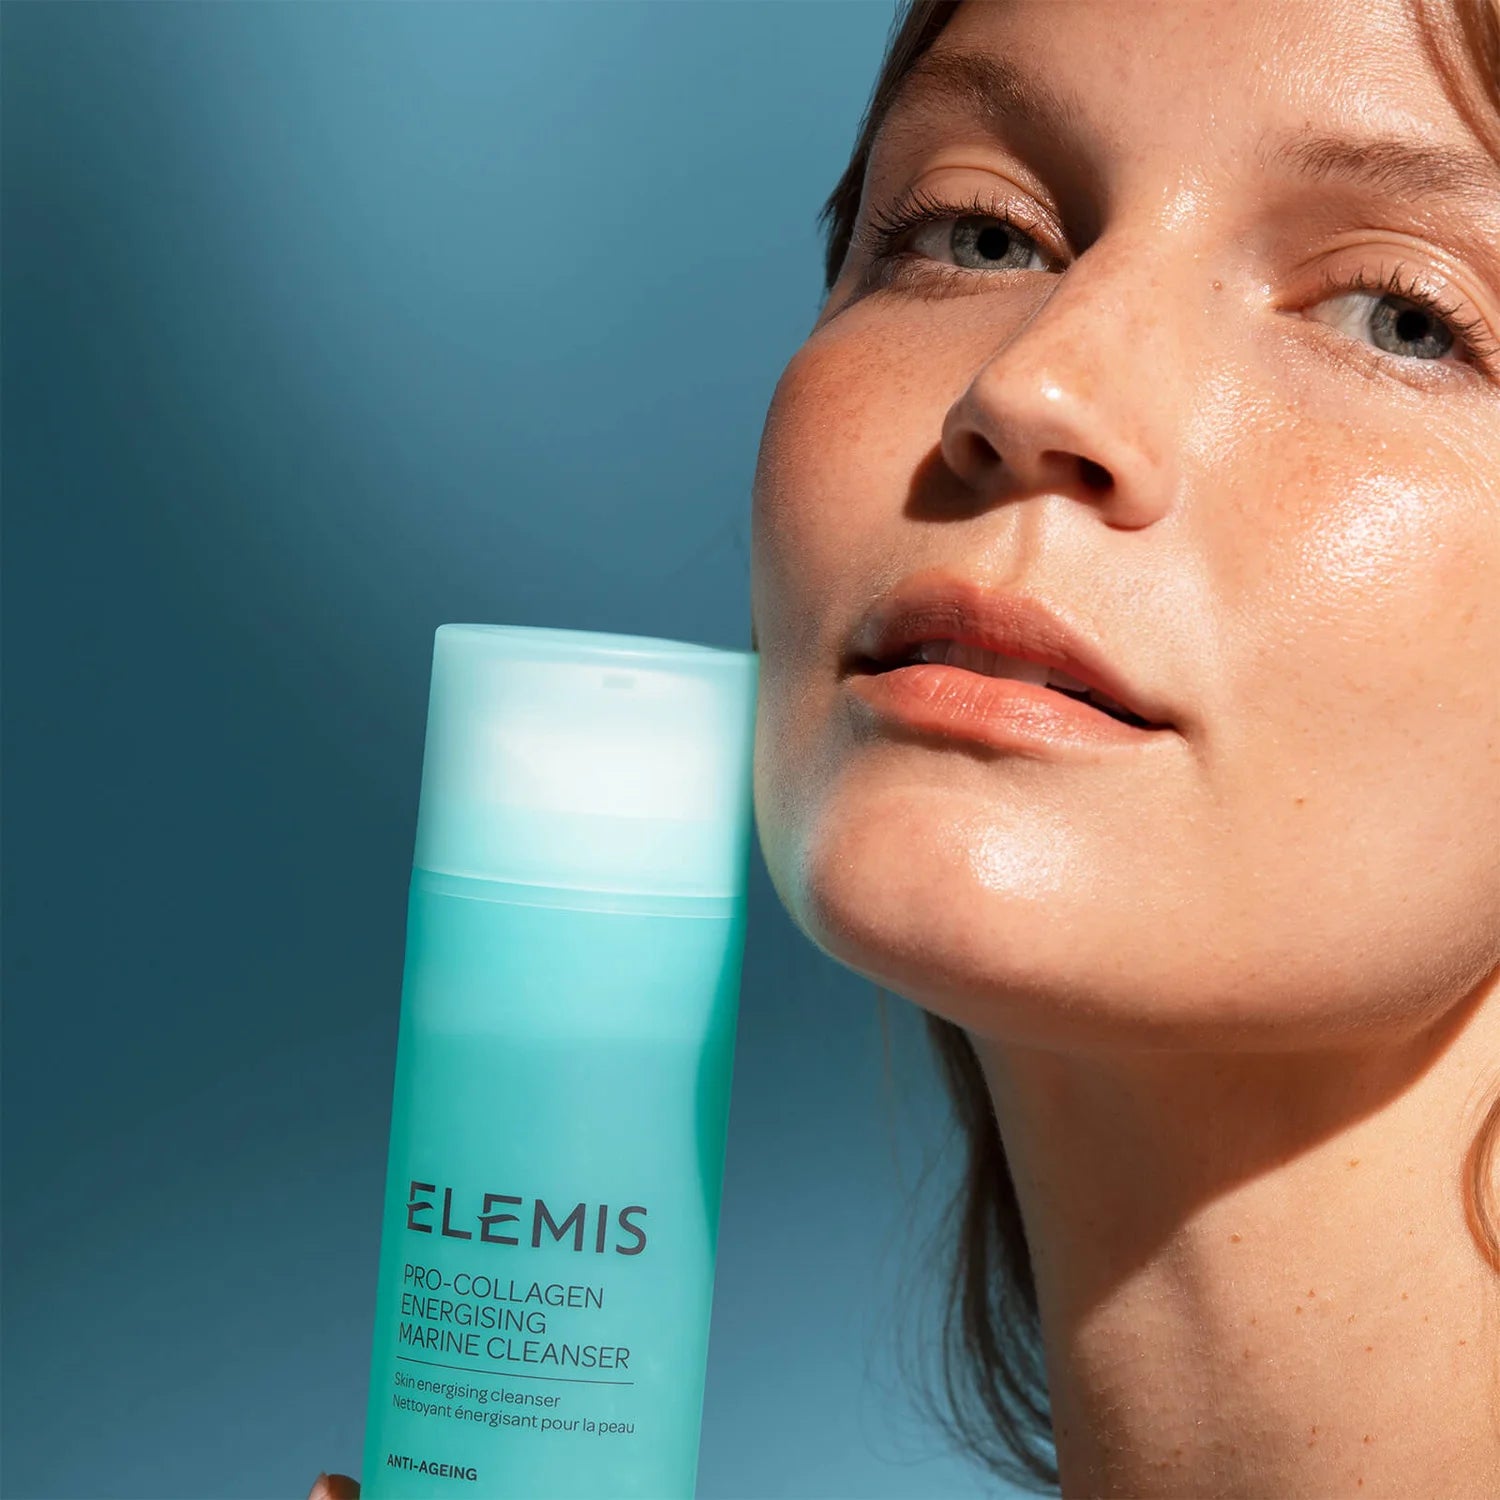 ELEMIS Pro-Collagen Energising Marine Cleanser with model that has glowing skin. 